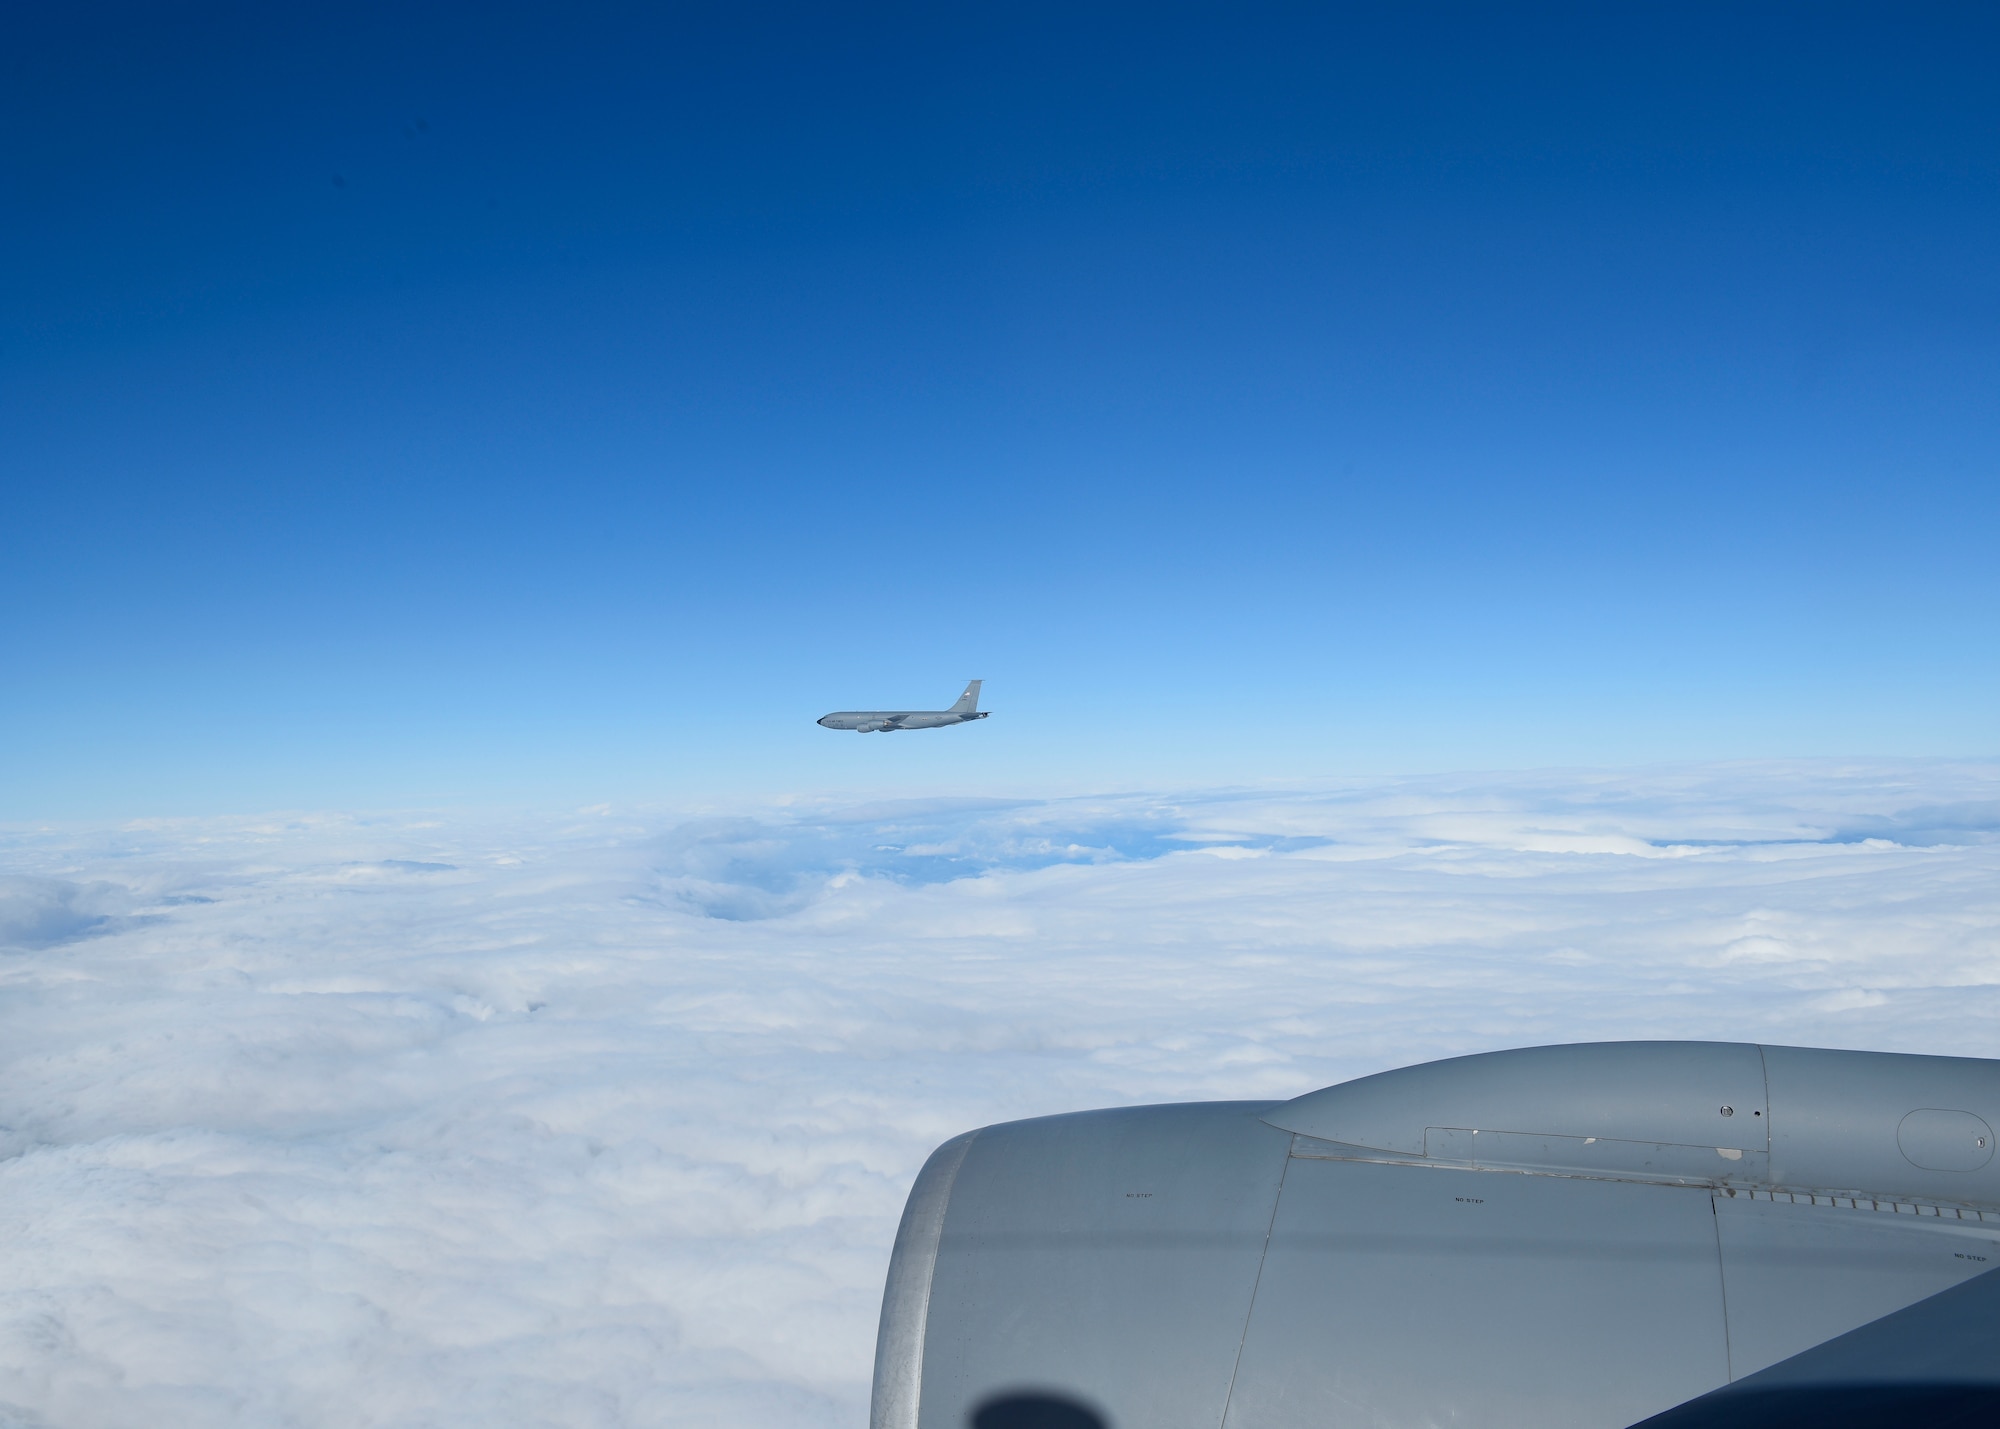 A KC-135 Statotanker flies to perform refueling connections with a B-52 Stratofortress during Exercise Global Thunder 2019 over the U.S. Northwestern Region, November 2018. Global Thunder is a U.S. Strategic Command exercise designed to ensure an efficient mission response by testing Airmen's ability to execute command, control and operational procedures during simulated combat scenarios. (U.S. Air Force photo/Airman 1st Class Lawrence Sena)